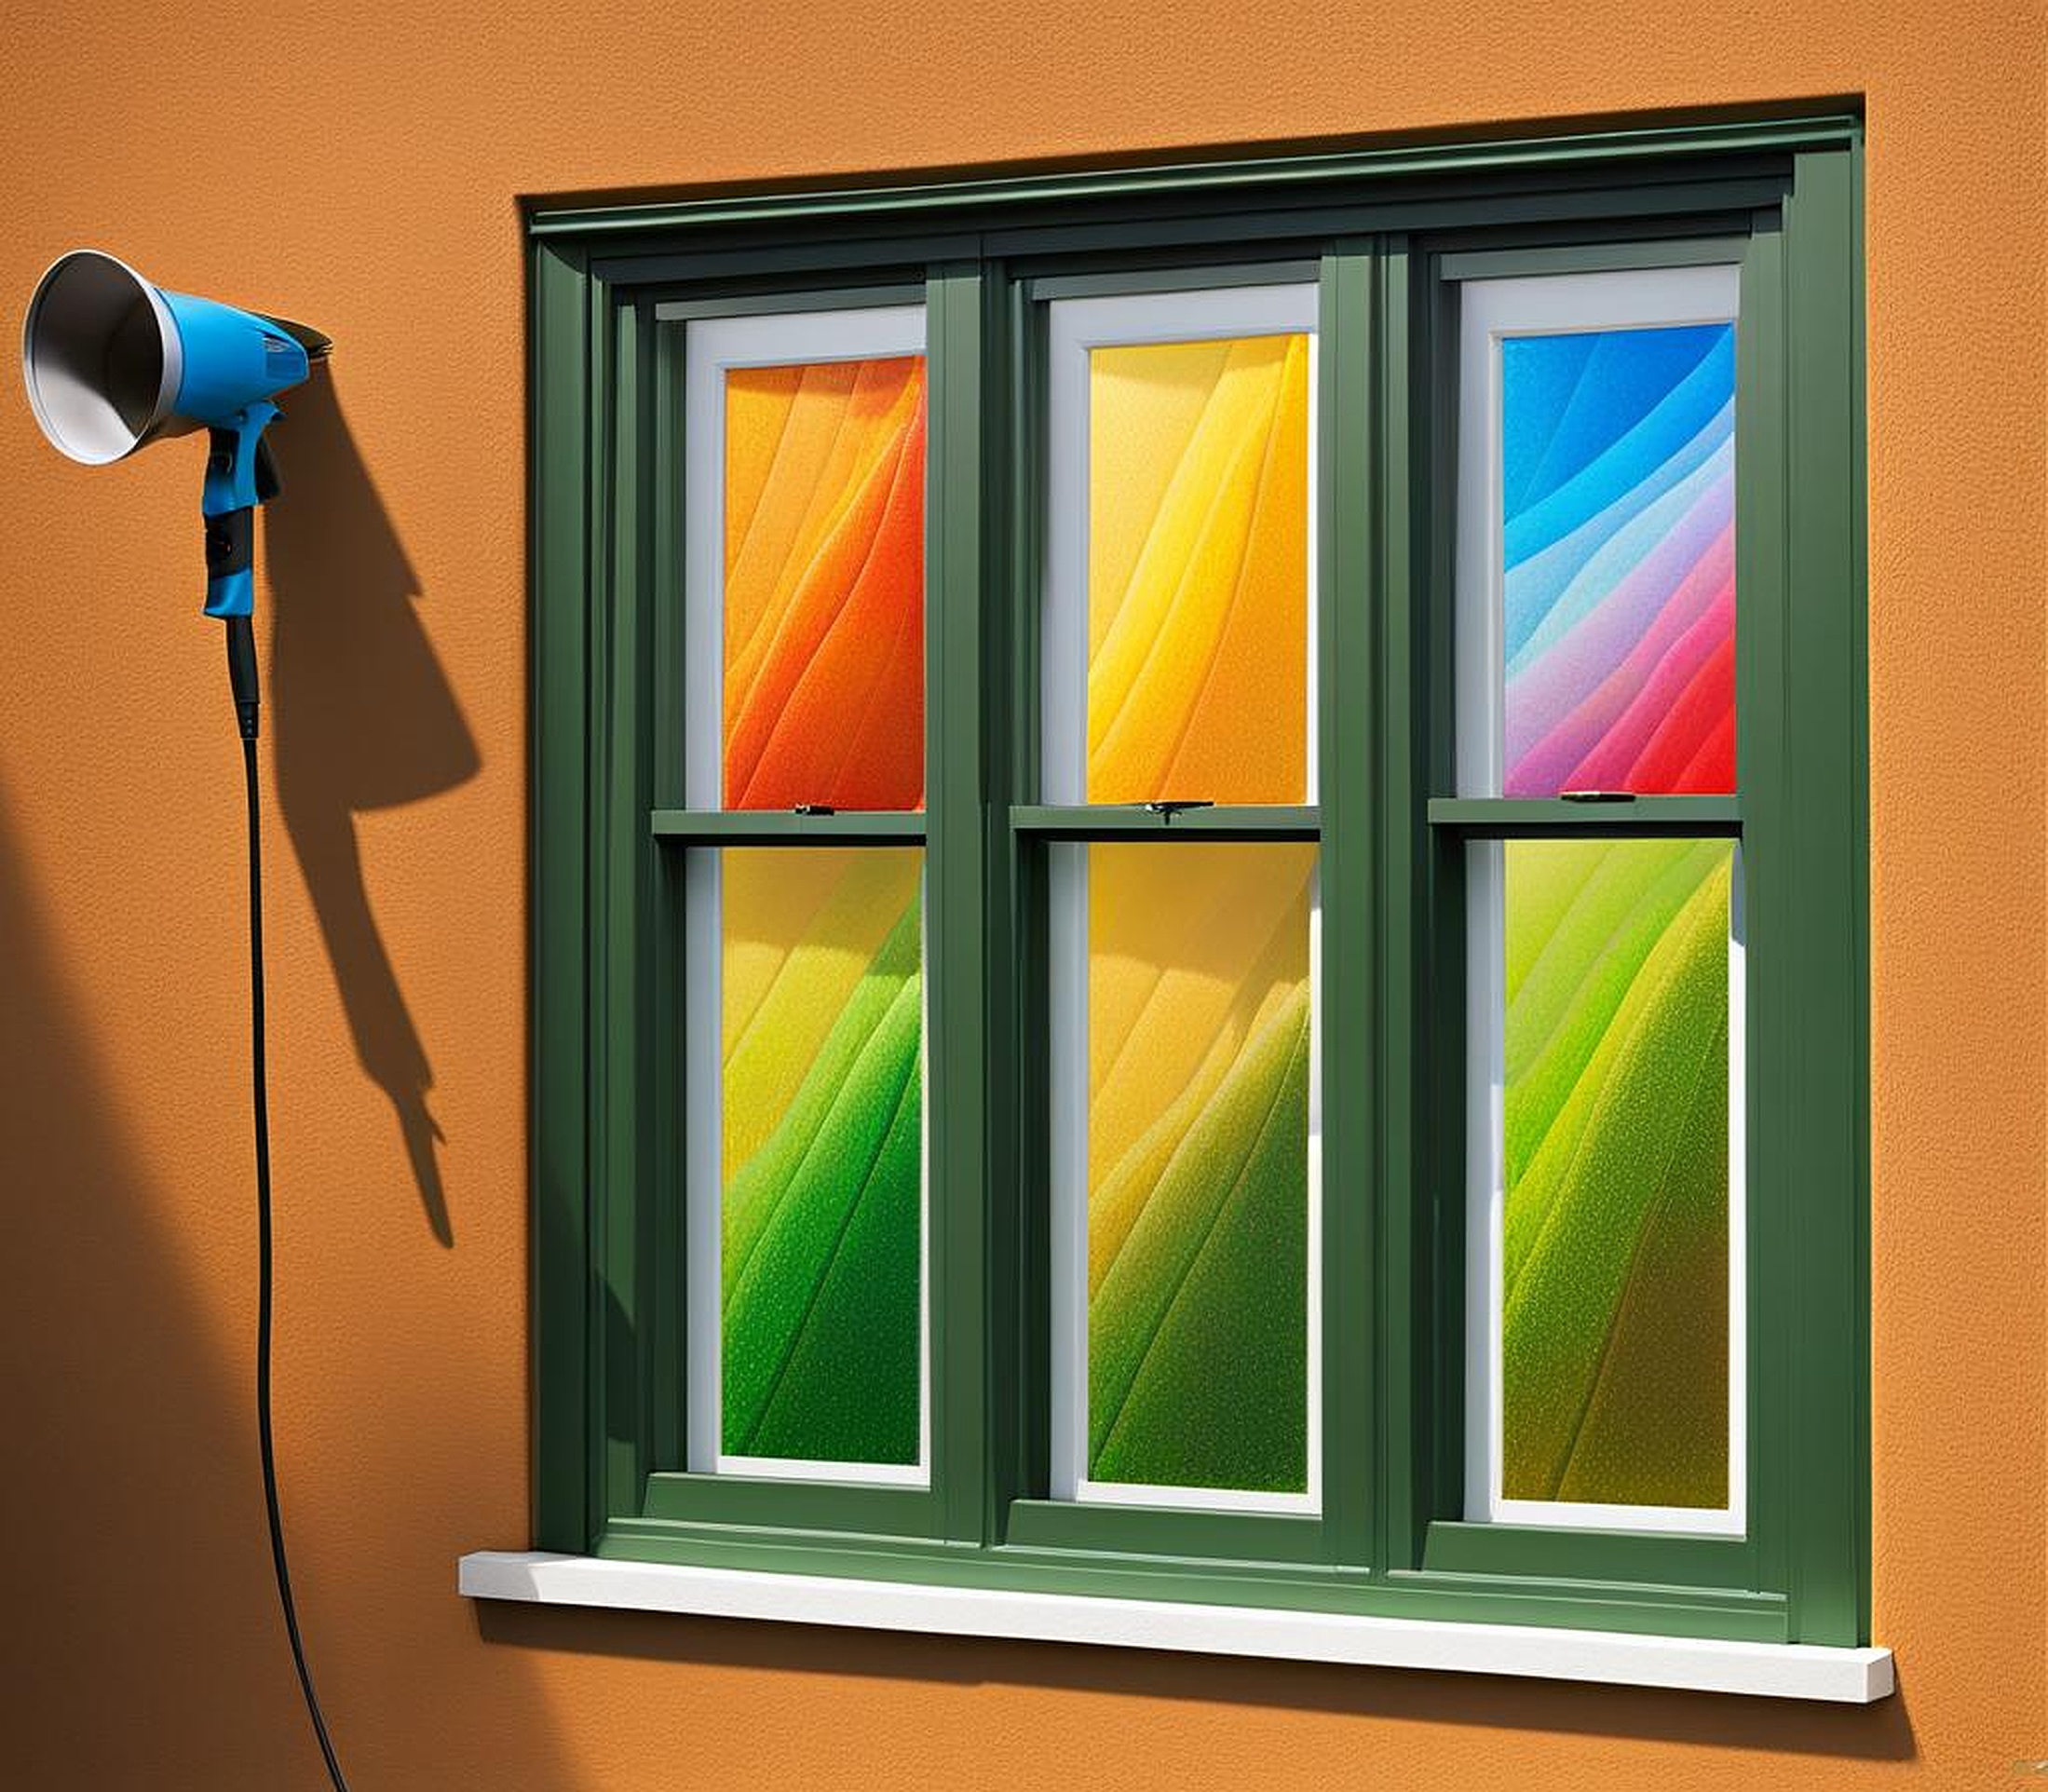 Guide to Choosing the Right Spray for Tinting Windows